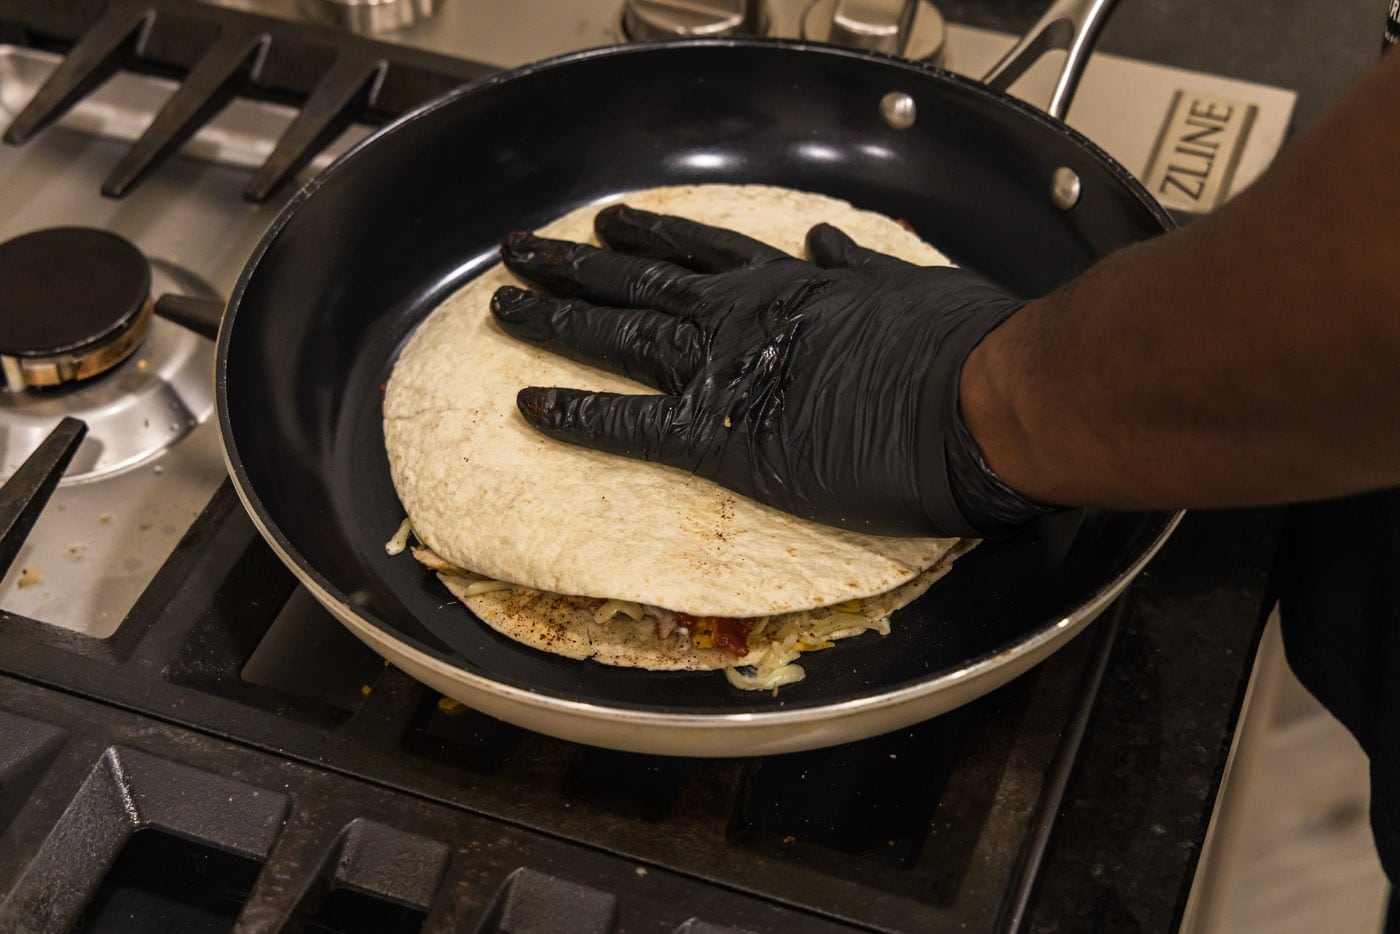 hand pressing down tortilla shell over the top of quesadilla in a skillet